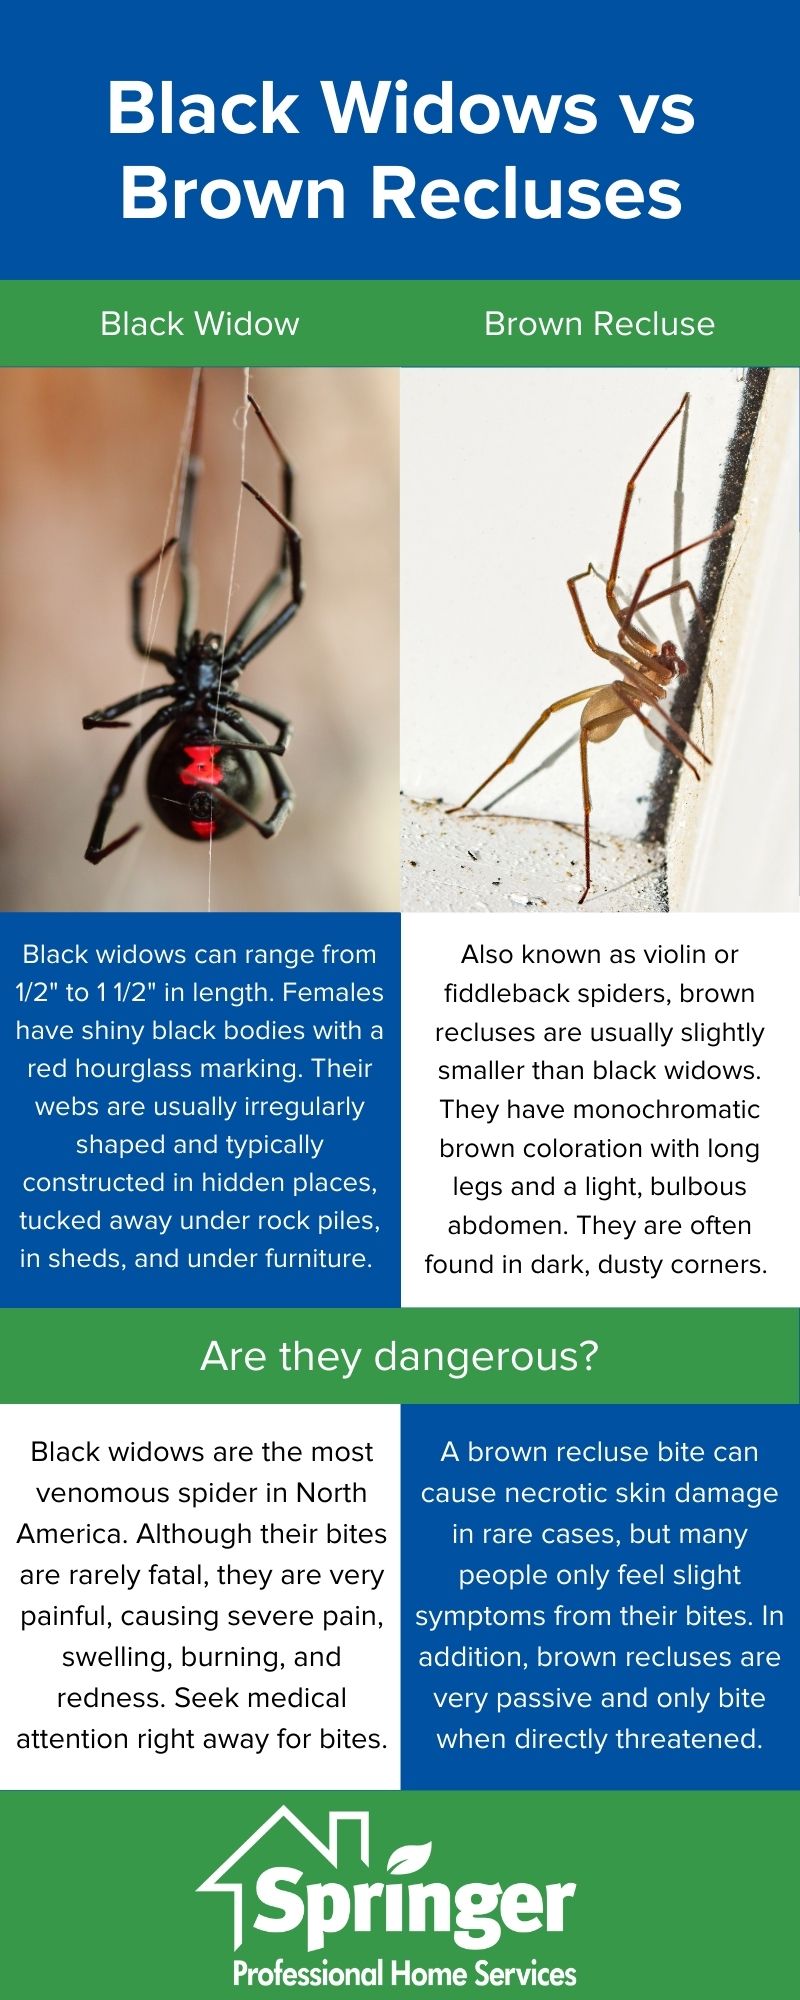 How to tell apart black widows and brown recluses in Des Moines IA - Springer Professional Home Services